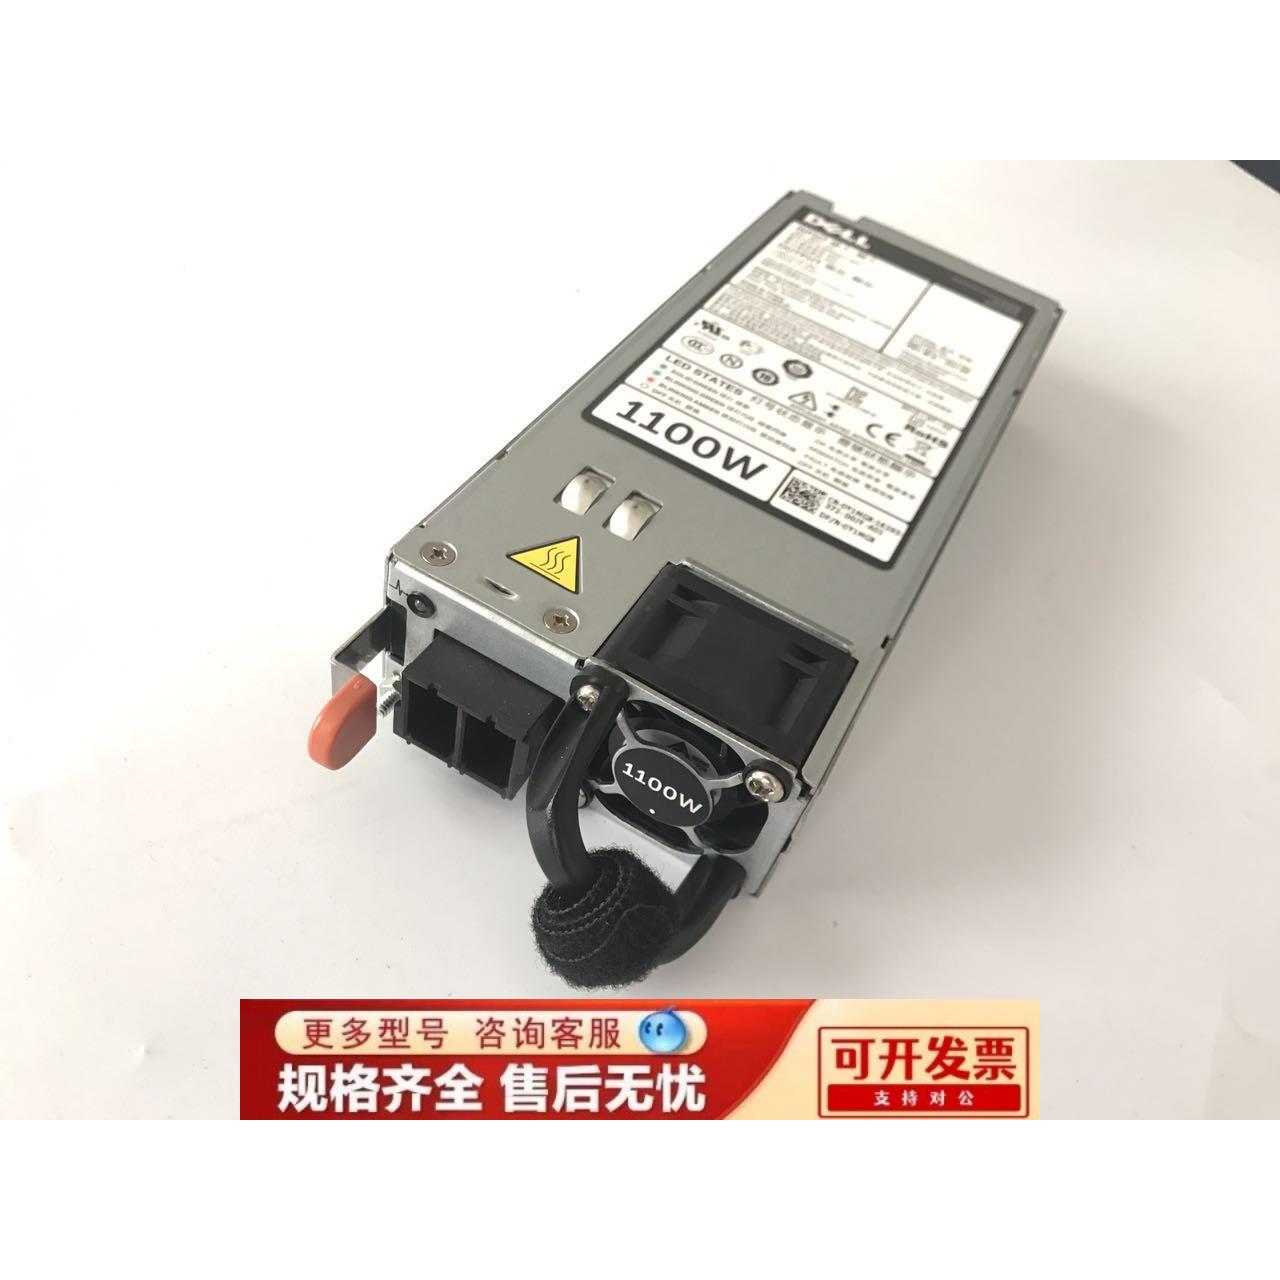 戴尔R730XD R720 R740服务器48V直流电源1100W E1100D-S0 5G4WK